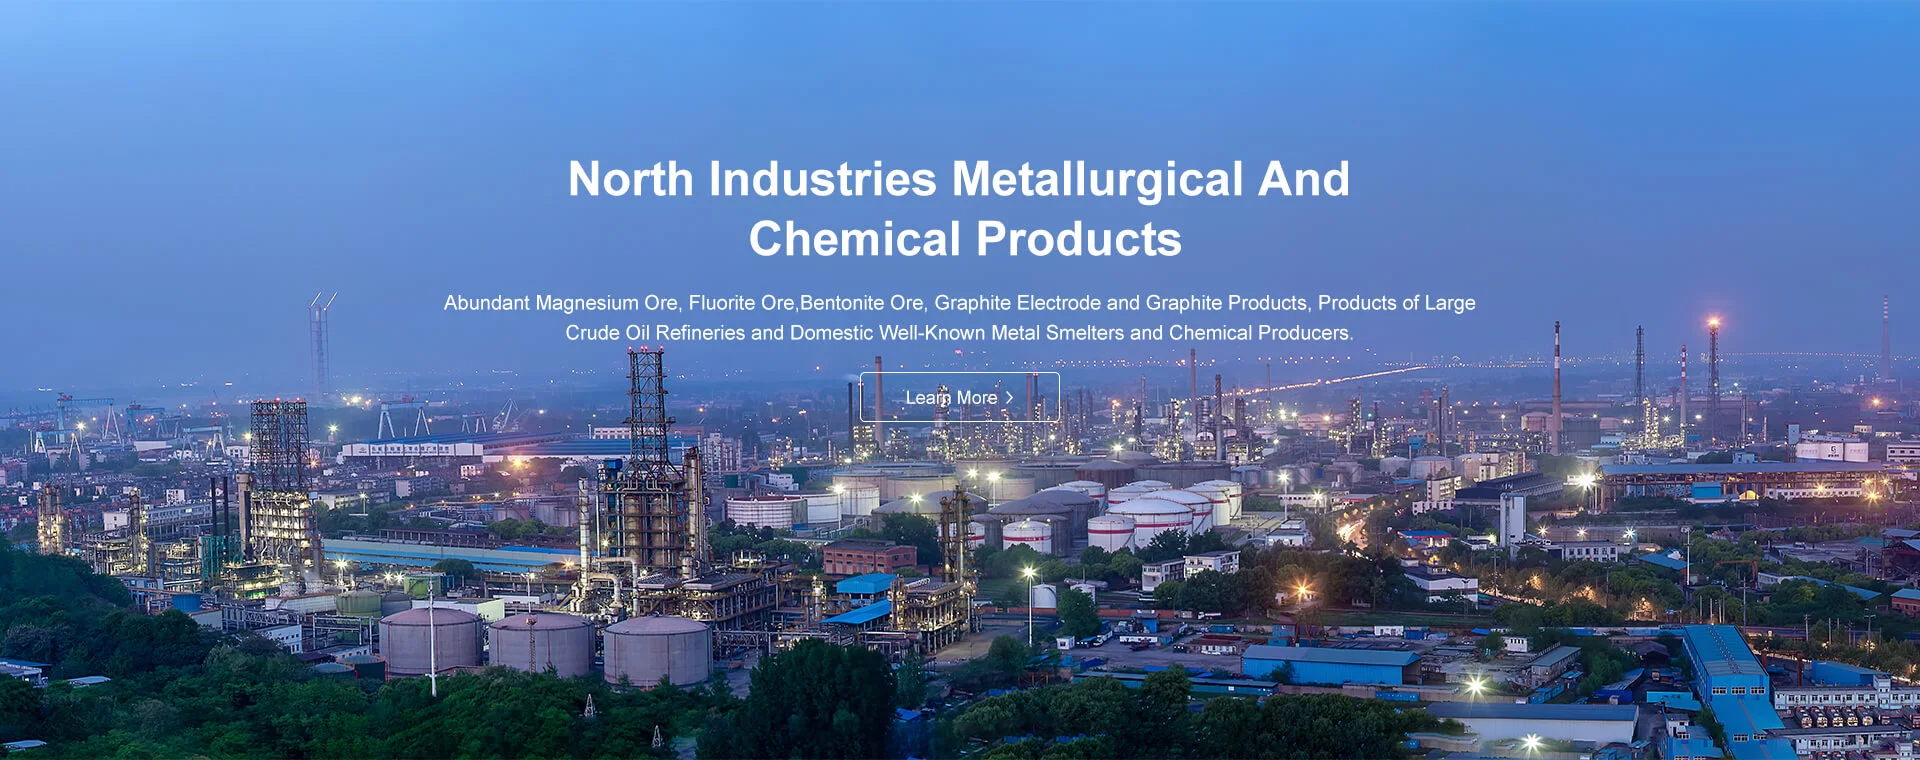 North Industries Metallurgical And Chemical Products